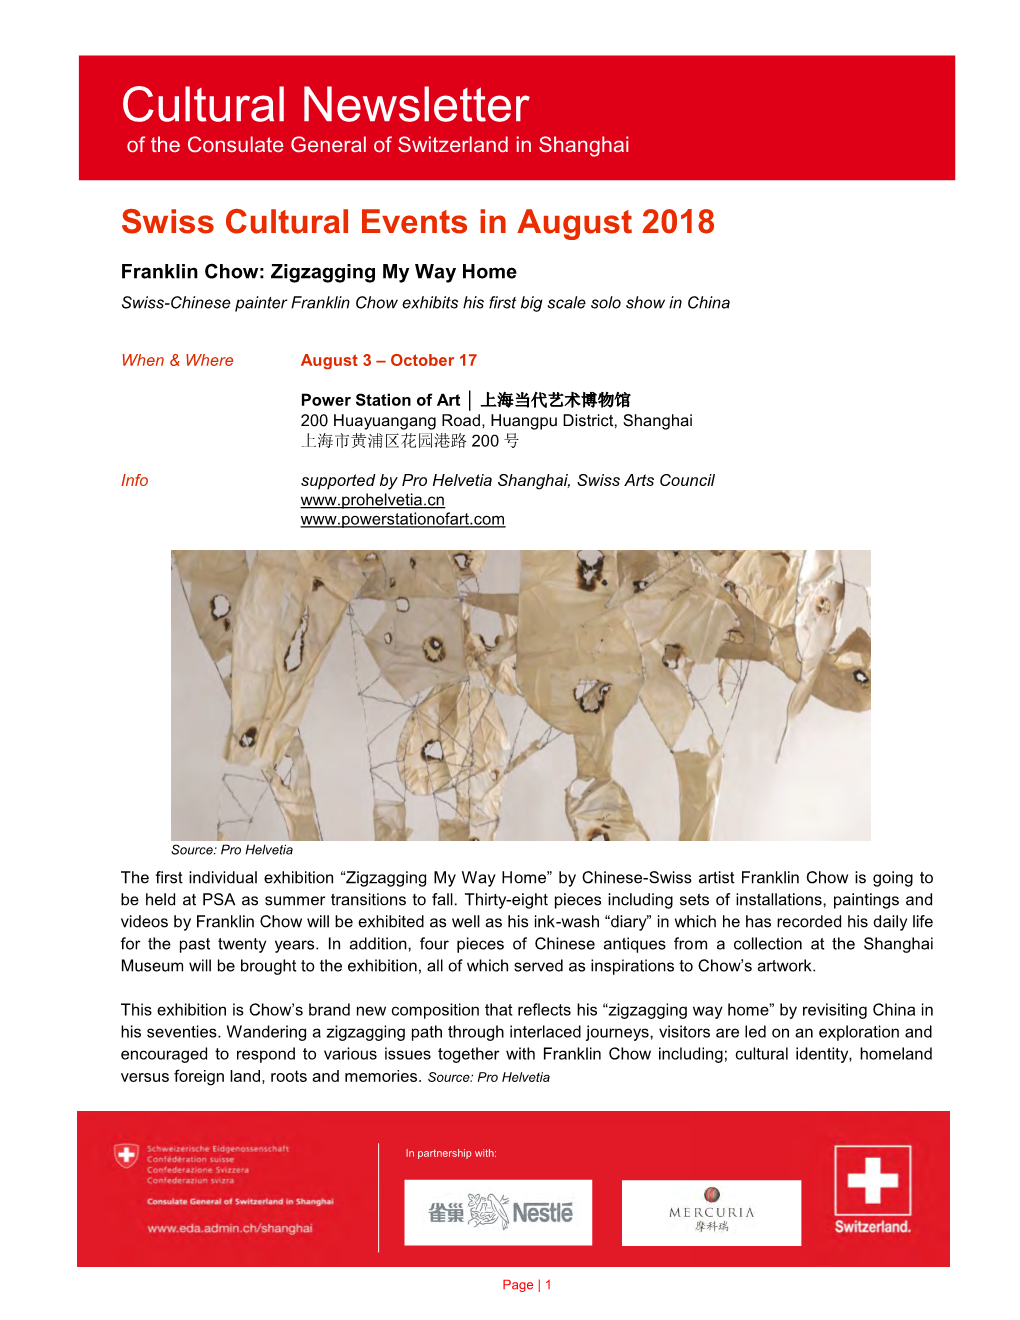 Swiss Cultural Events in August 2018